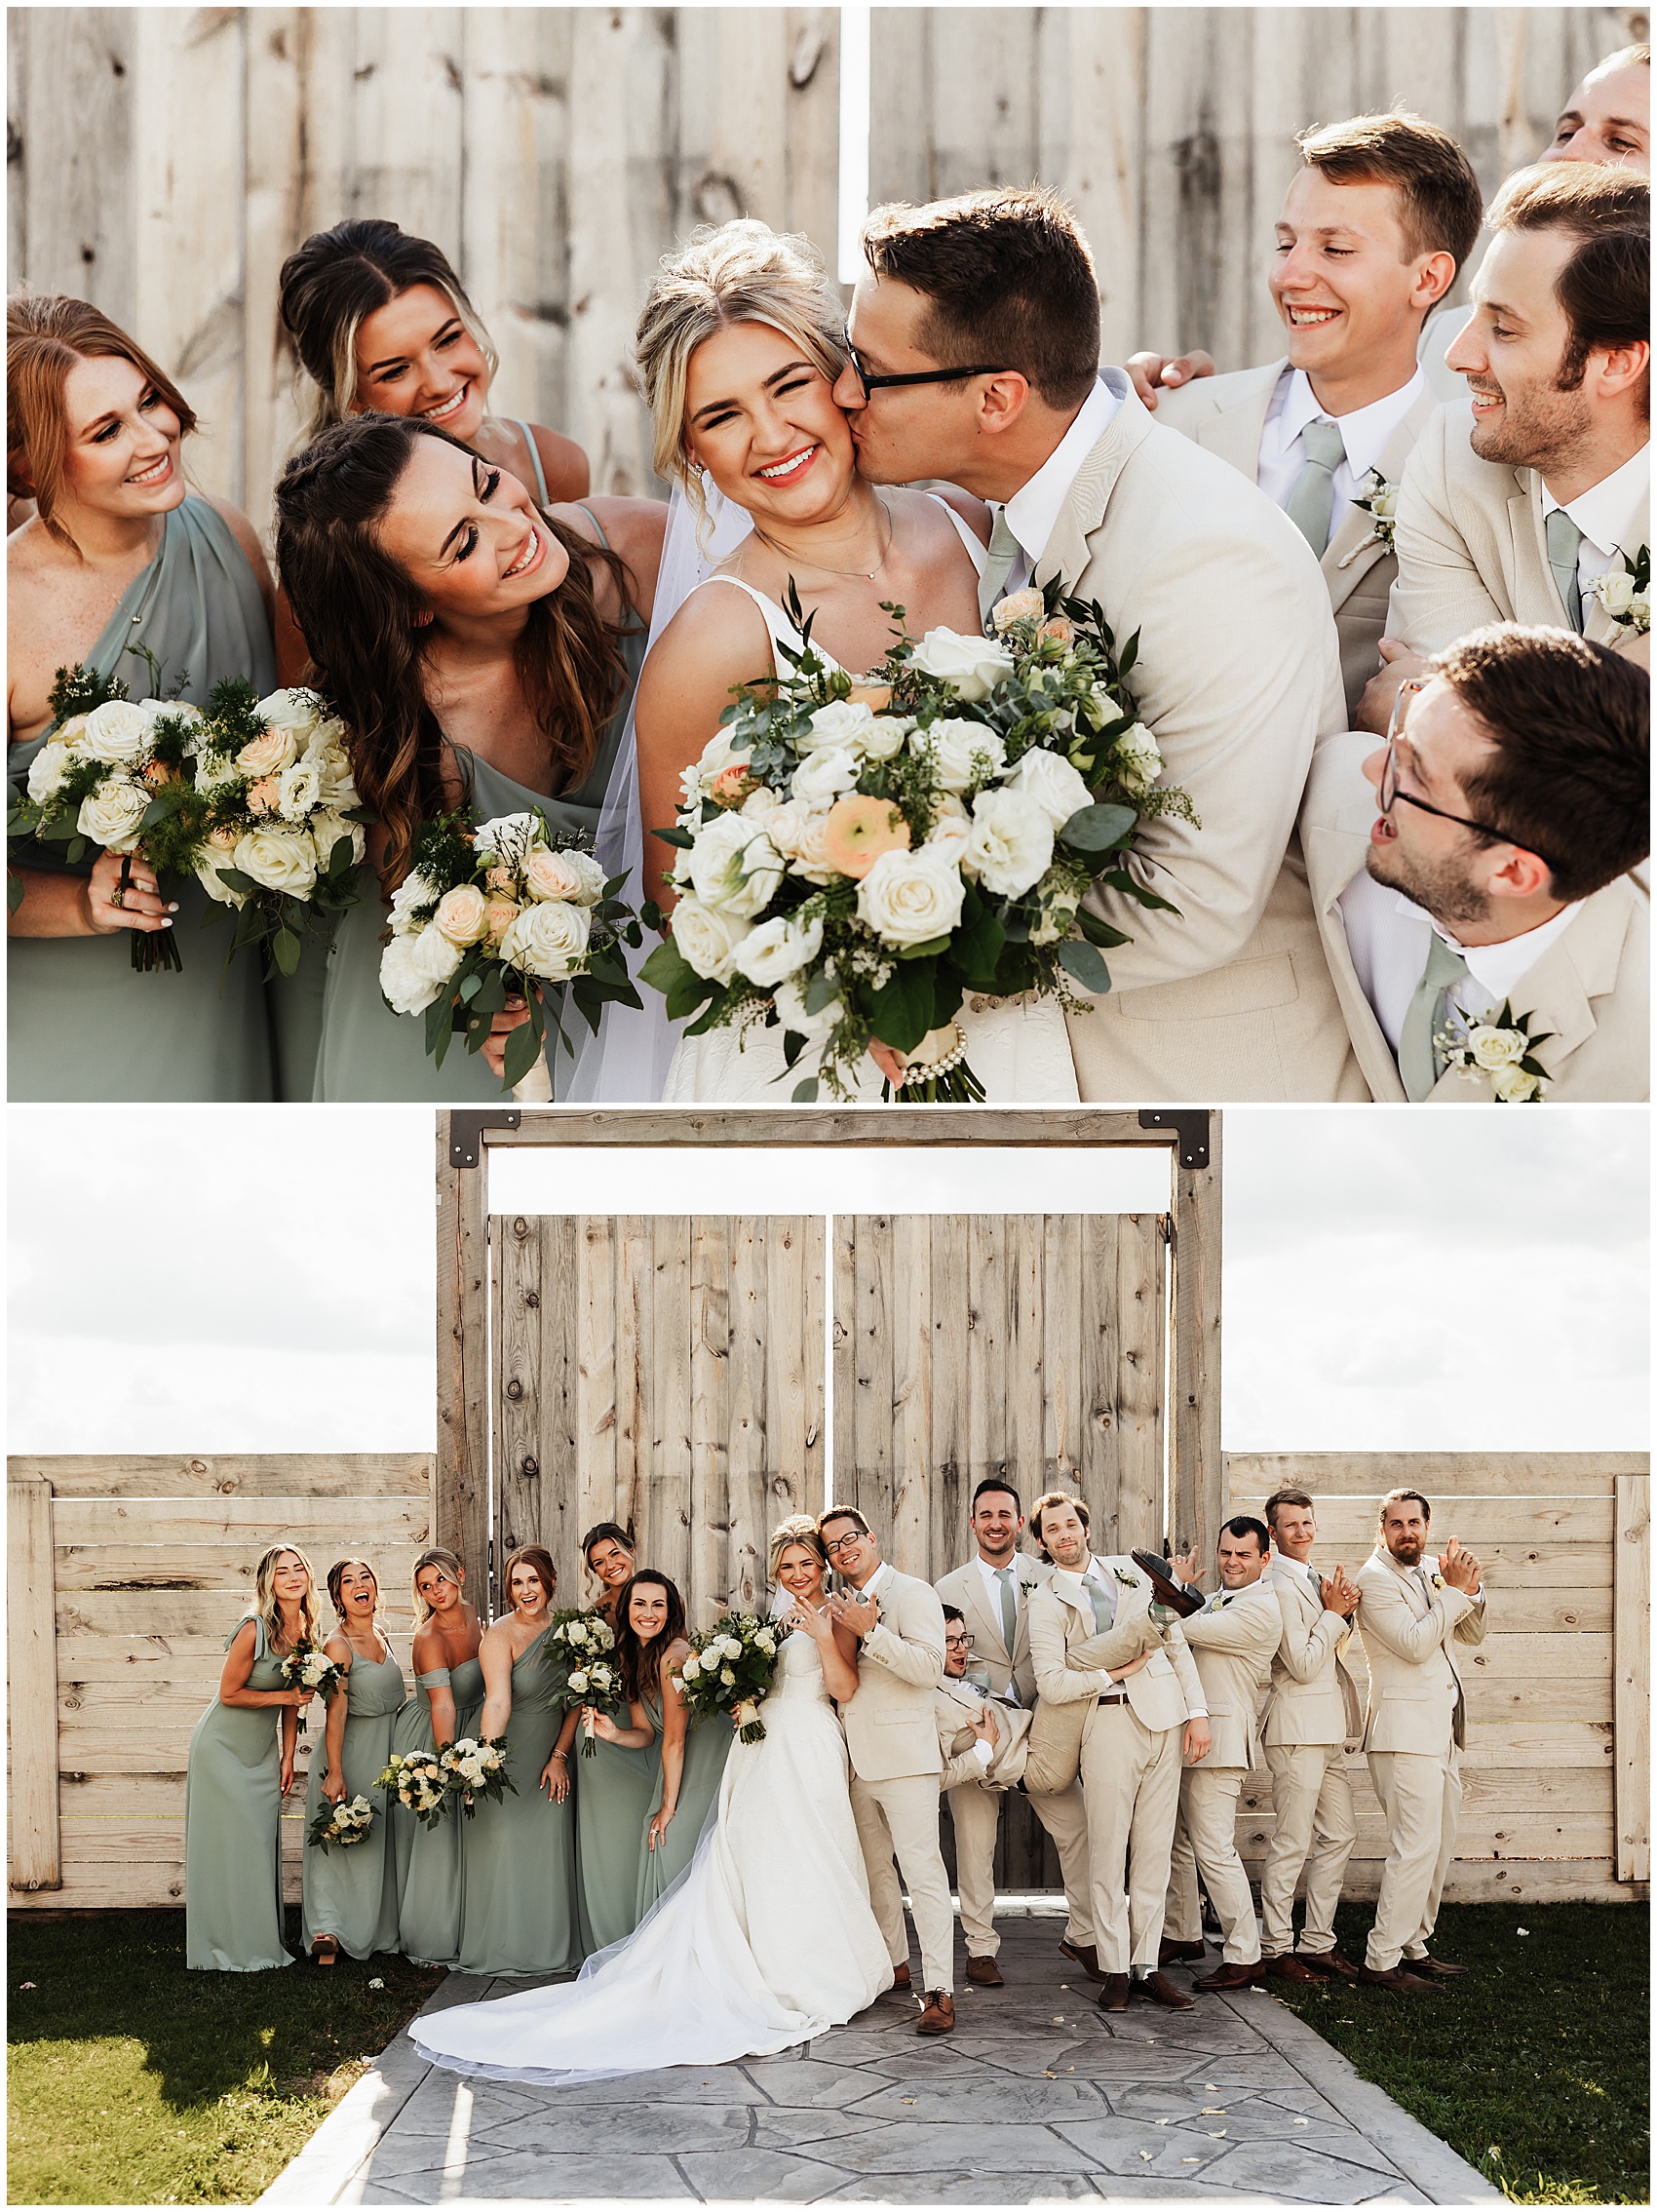 A groom kisses his bride while standing by a large gate surrounded by their bridesmaids and groomsmen